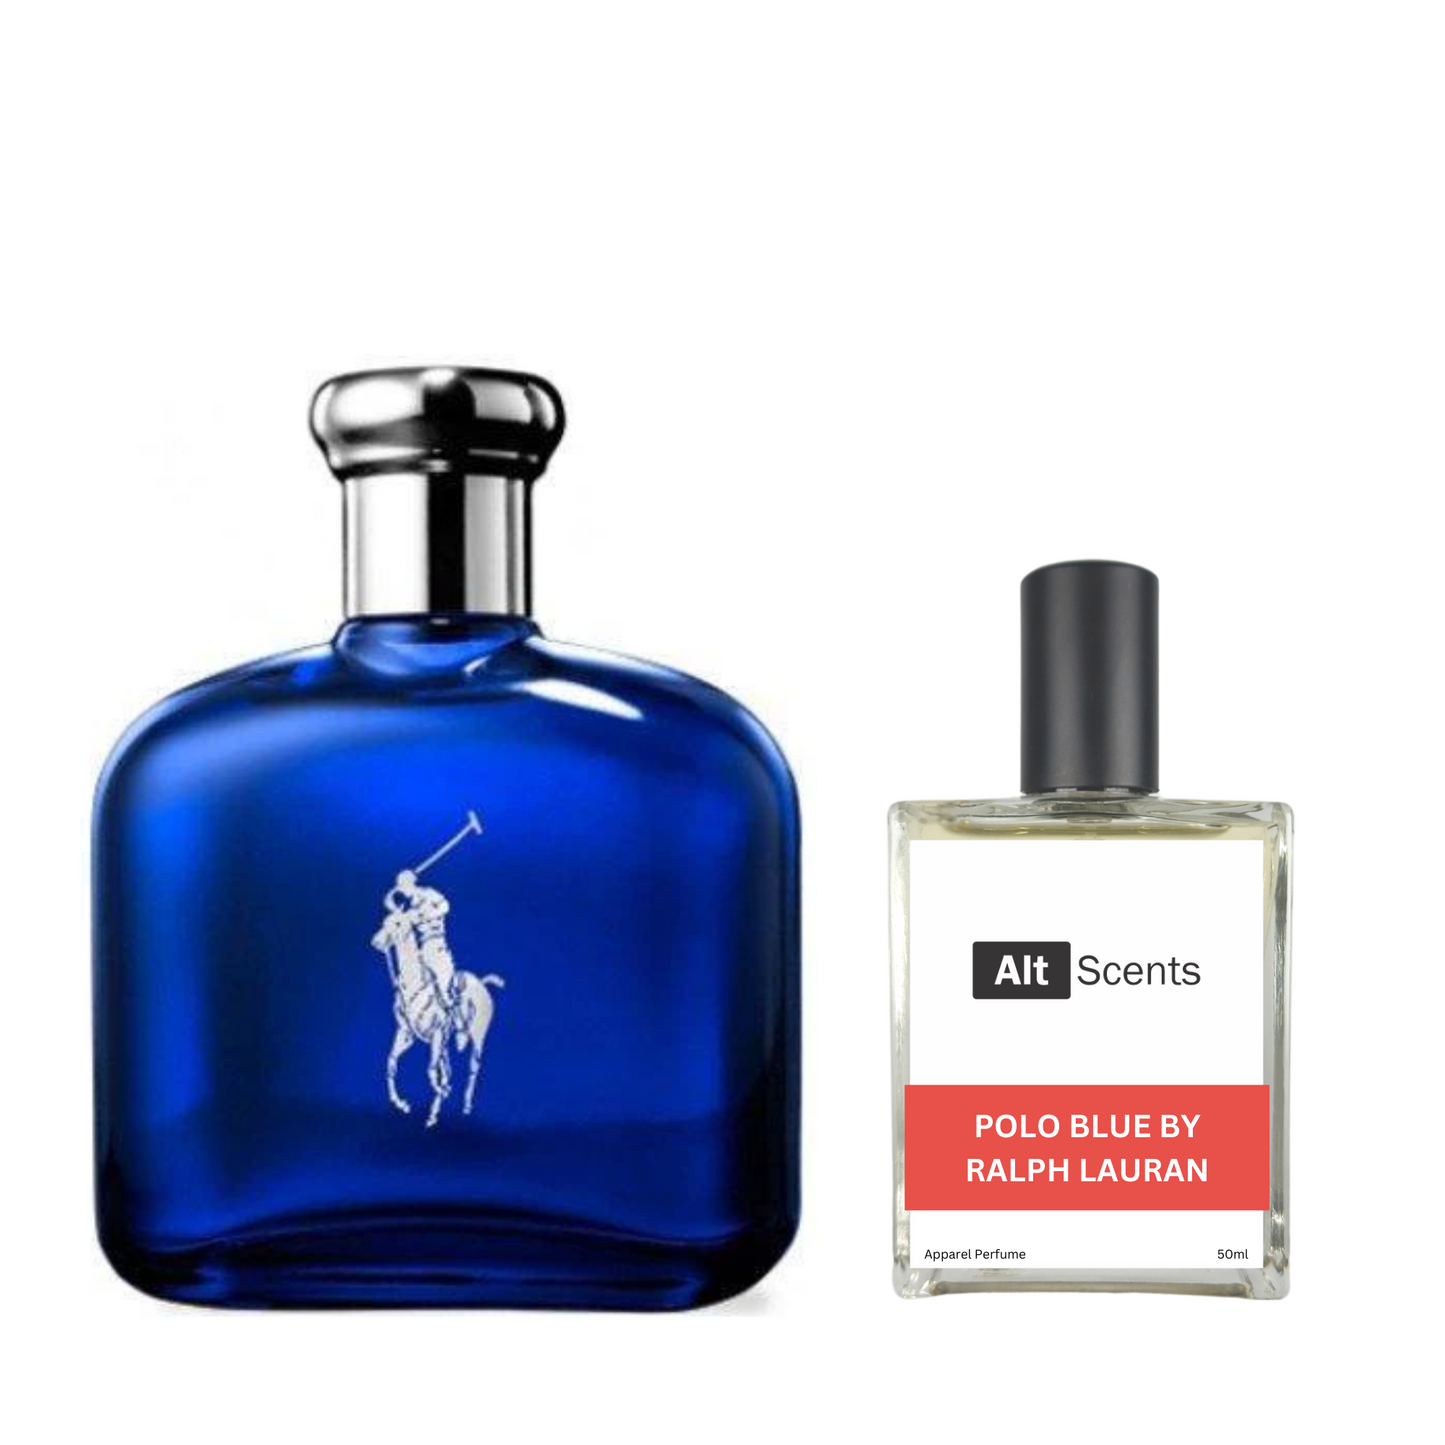 Polo Blue by Ralph Lauren type Perfume for Men